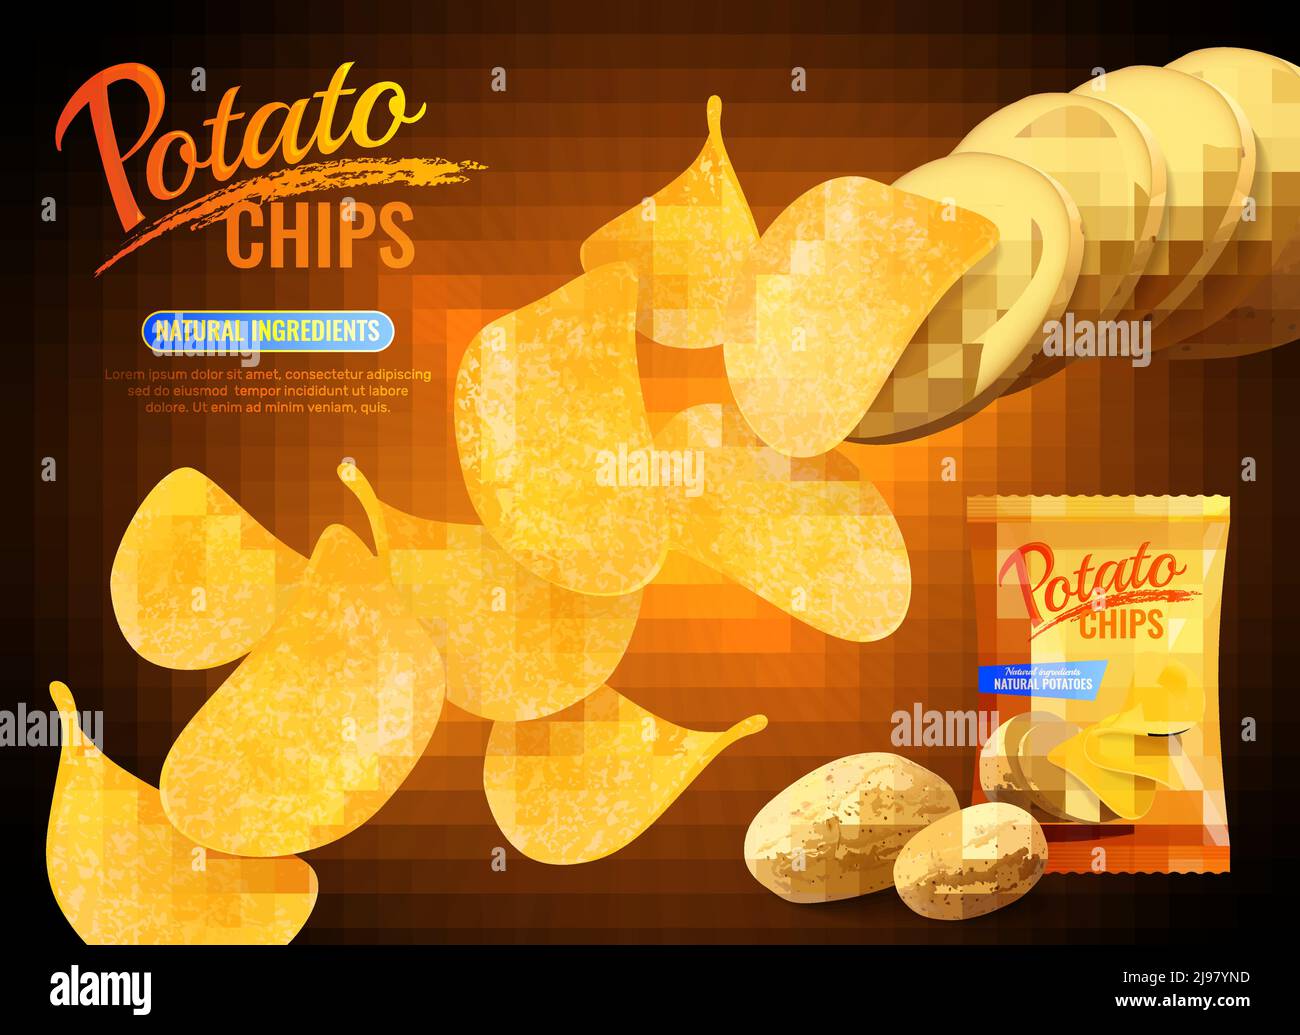 Potato chips advertising composition with realistic images of crisps natural potatoes and pack shot with text vector illustration Stock Vector